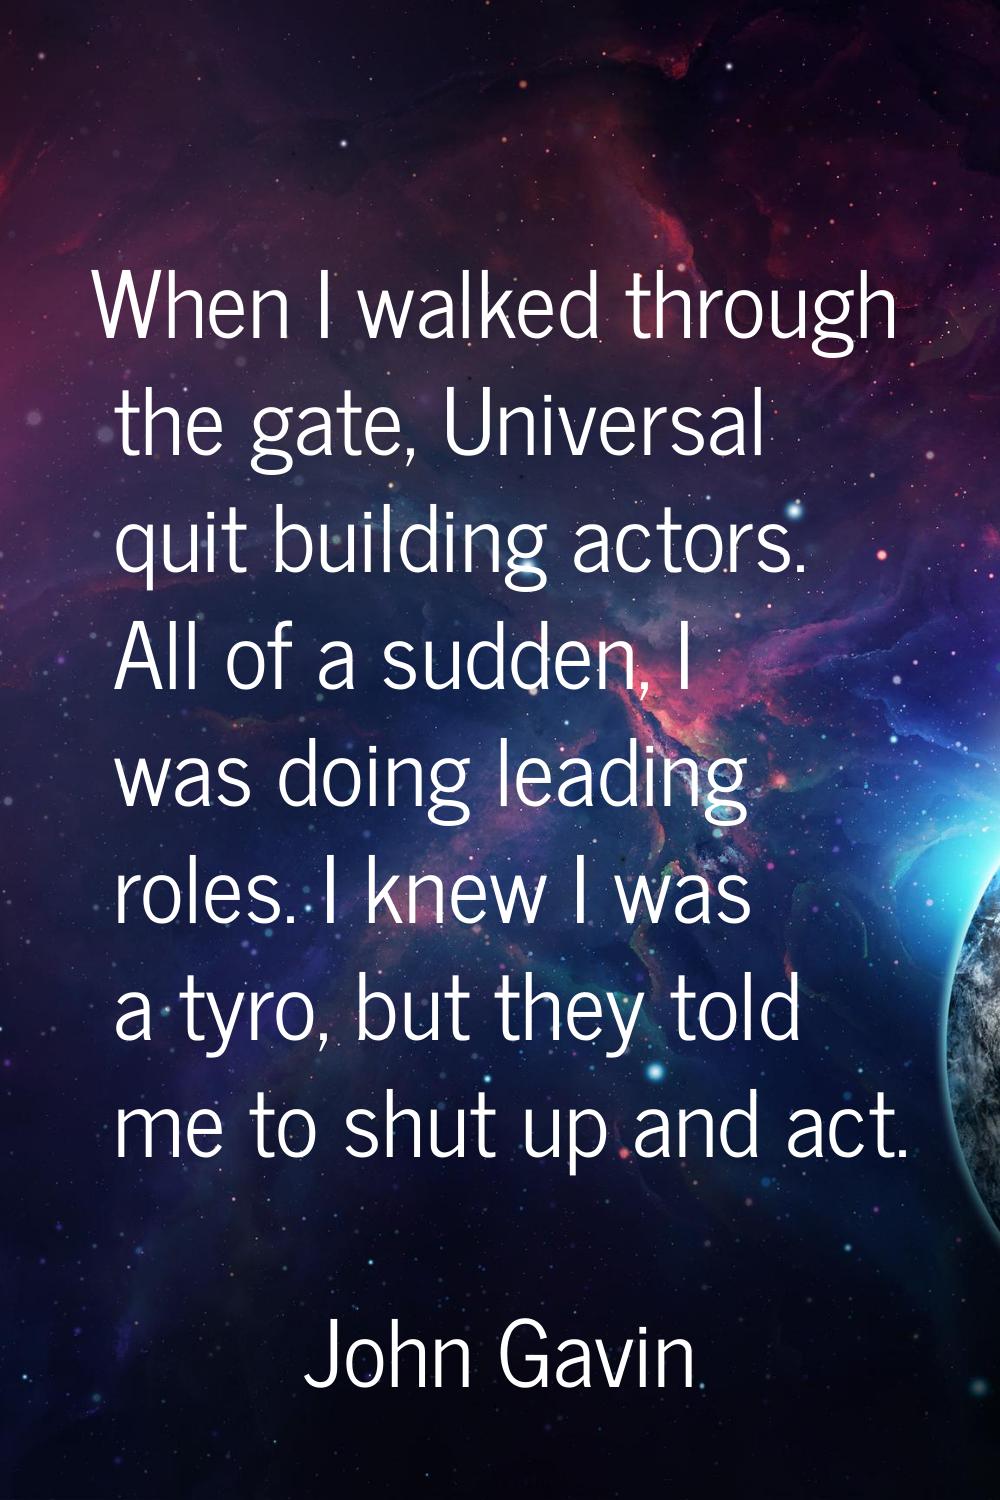 When I walked through the gate, Universal quit building actors. All of a sudden, I was doing leadin